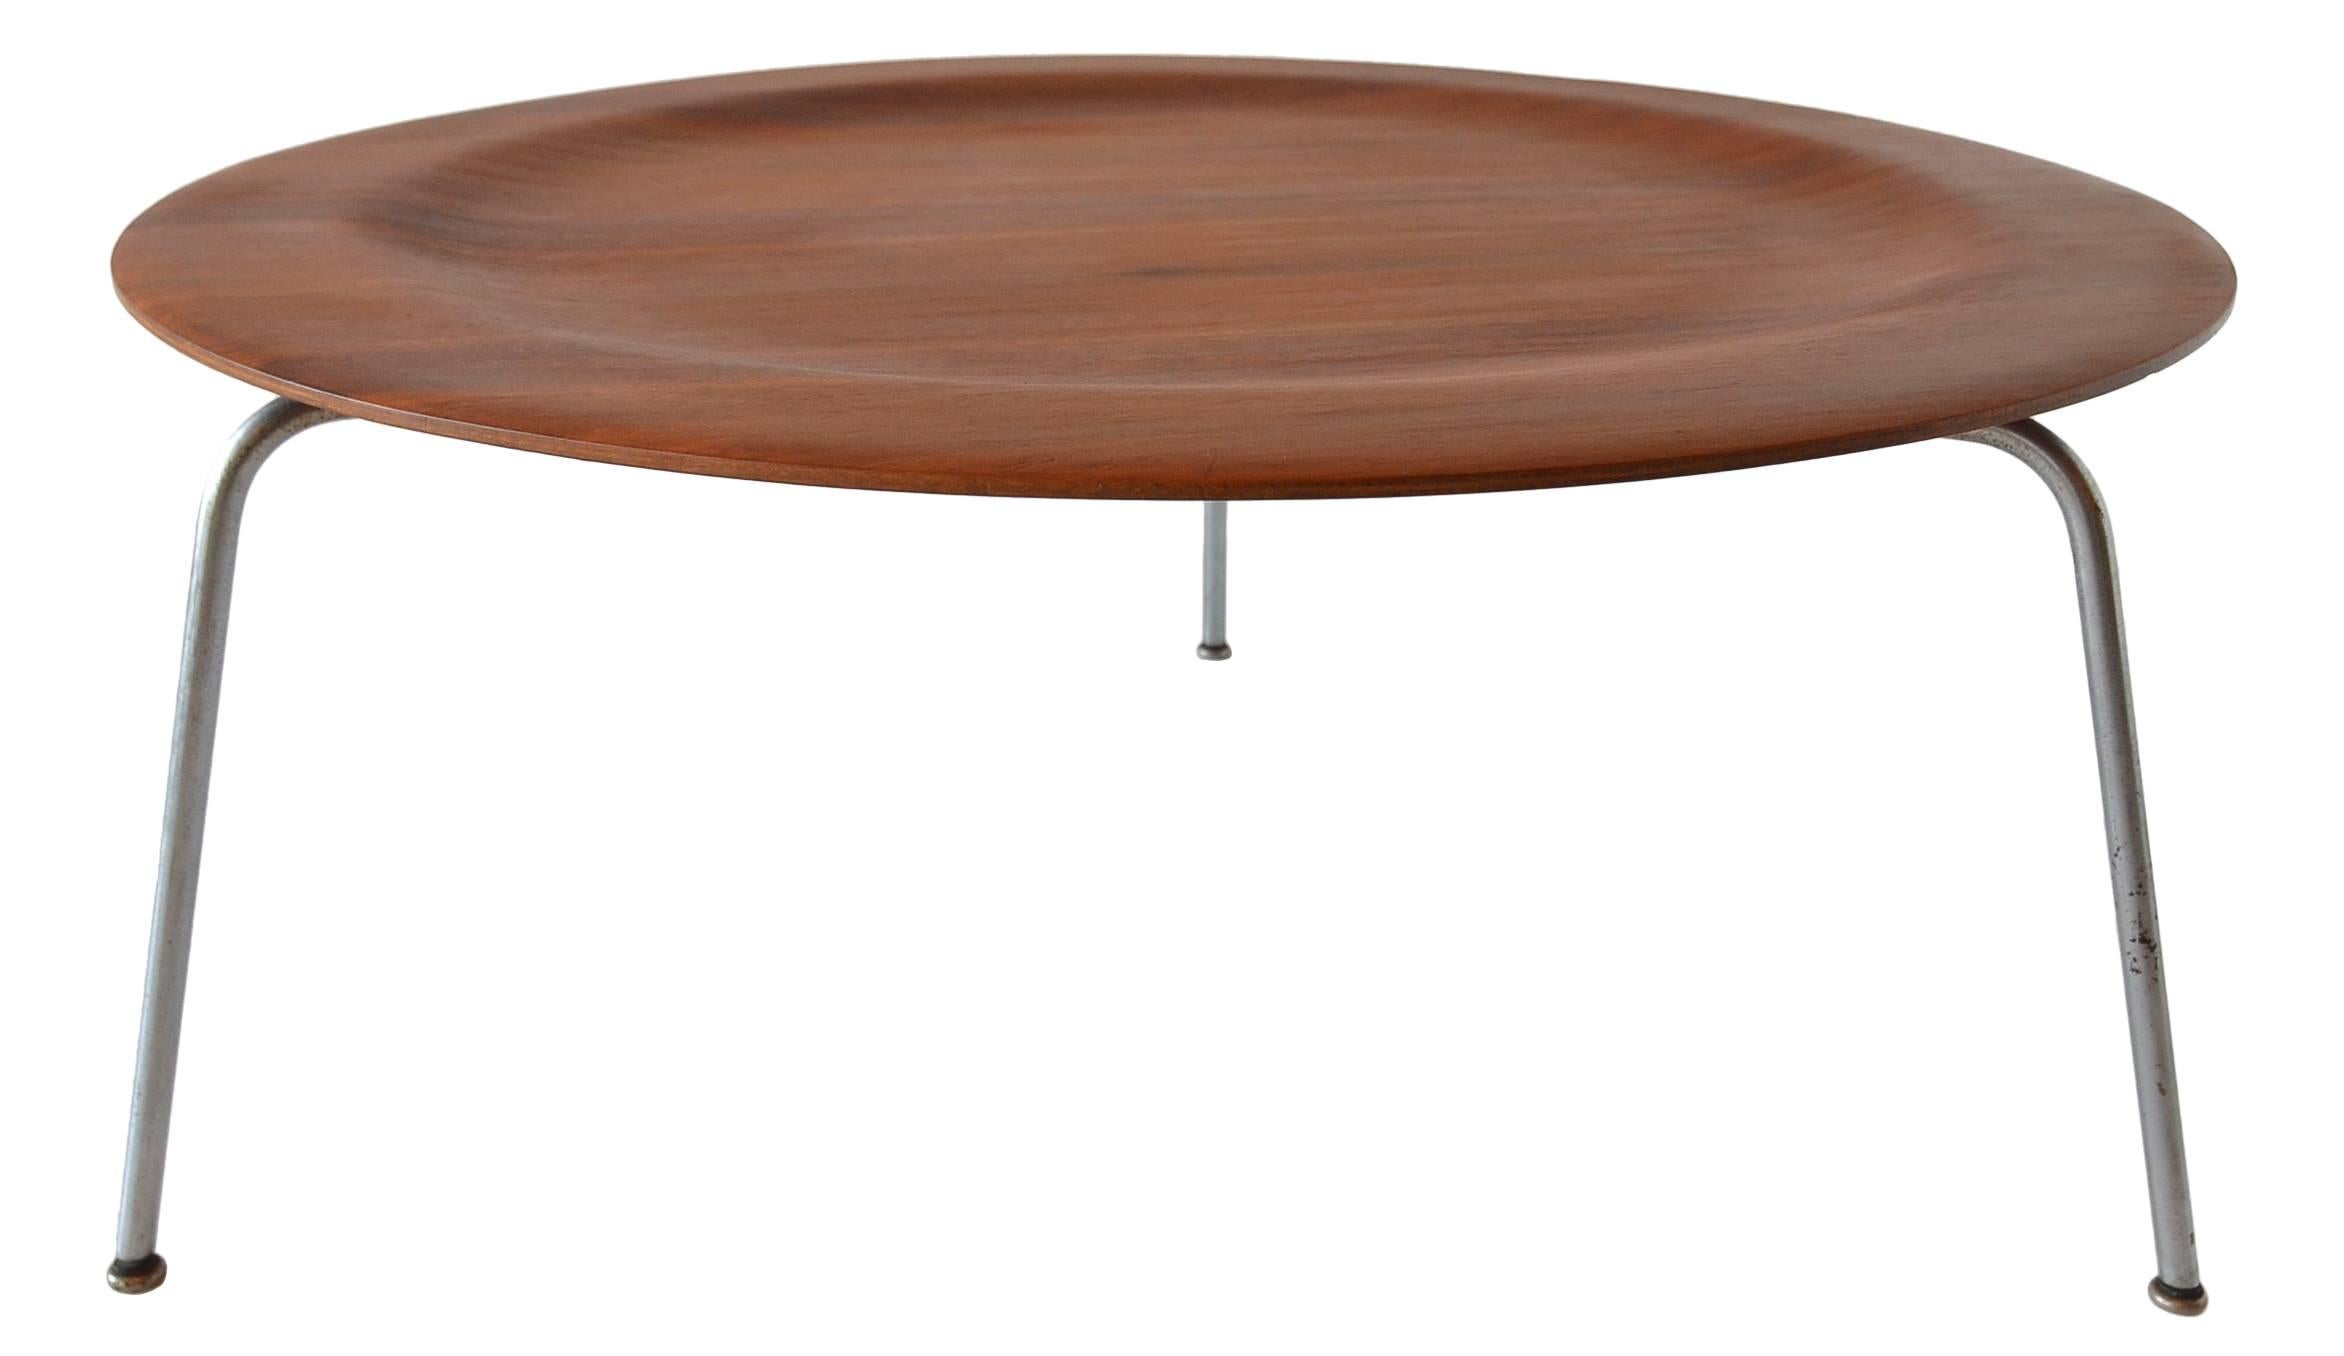 An incredible rare example of the iconic Charles Eames CTM for Evans Products in 1946.
There have been a few examples of the three-legged coffee table to show up to market but all have the Sam Rubber shock mount attachment. This example has a